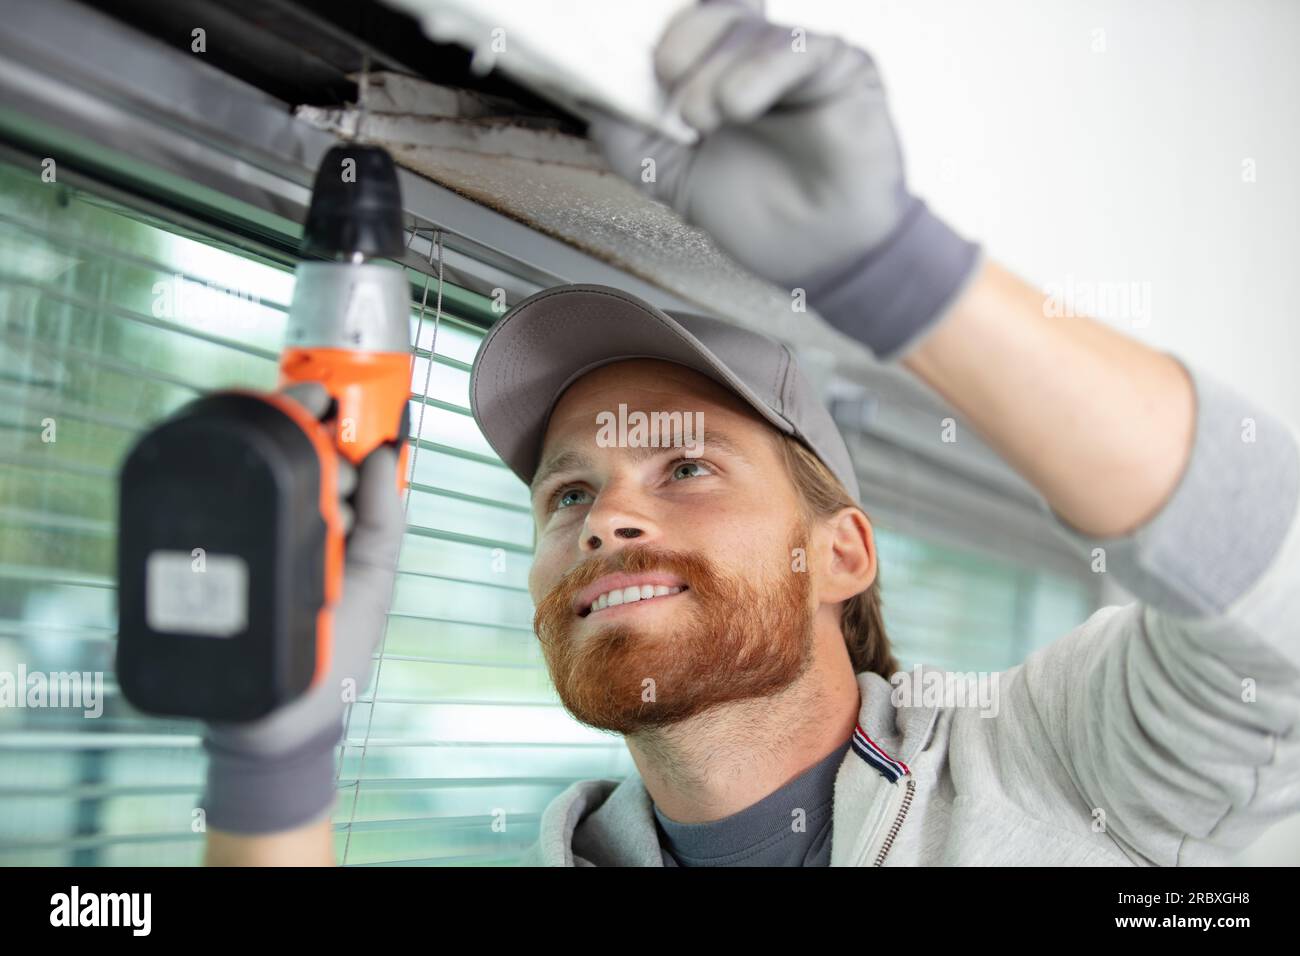 worker drilling ceiling for curtain rail Stock Photo